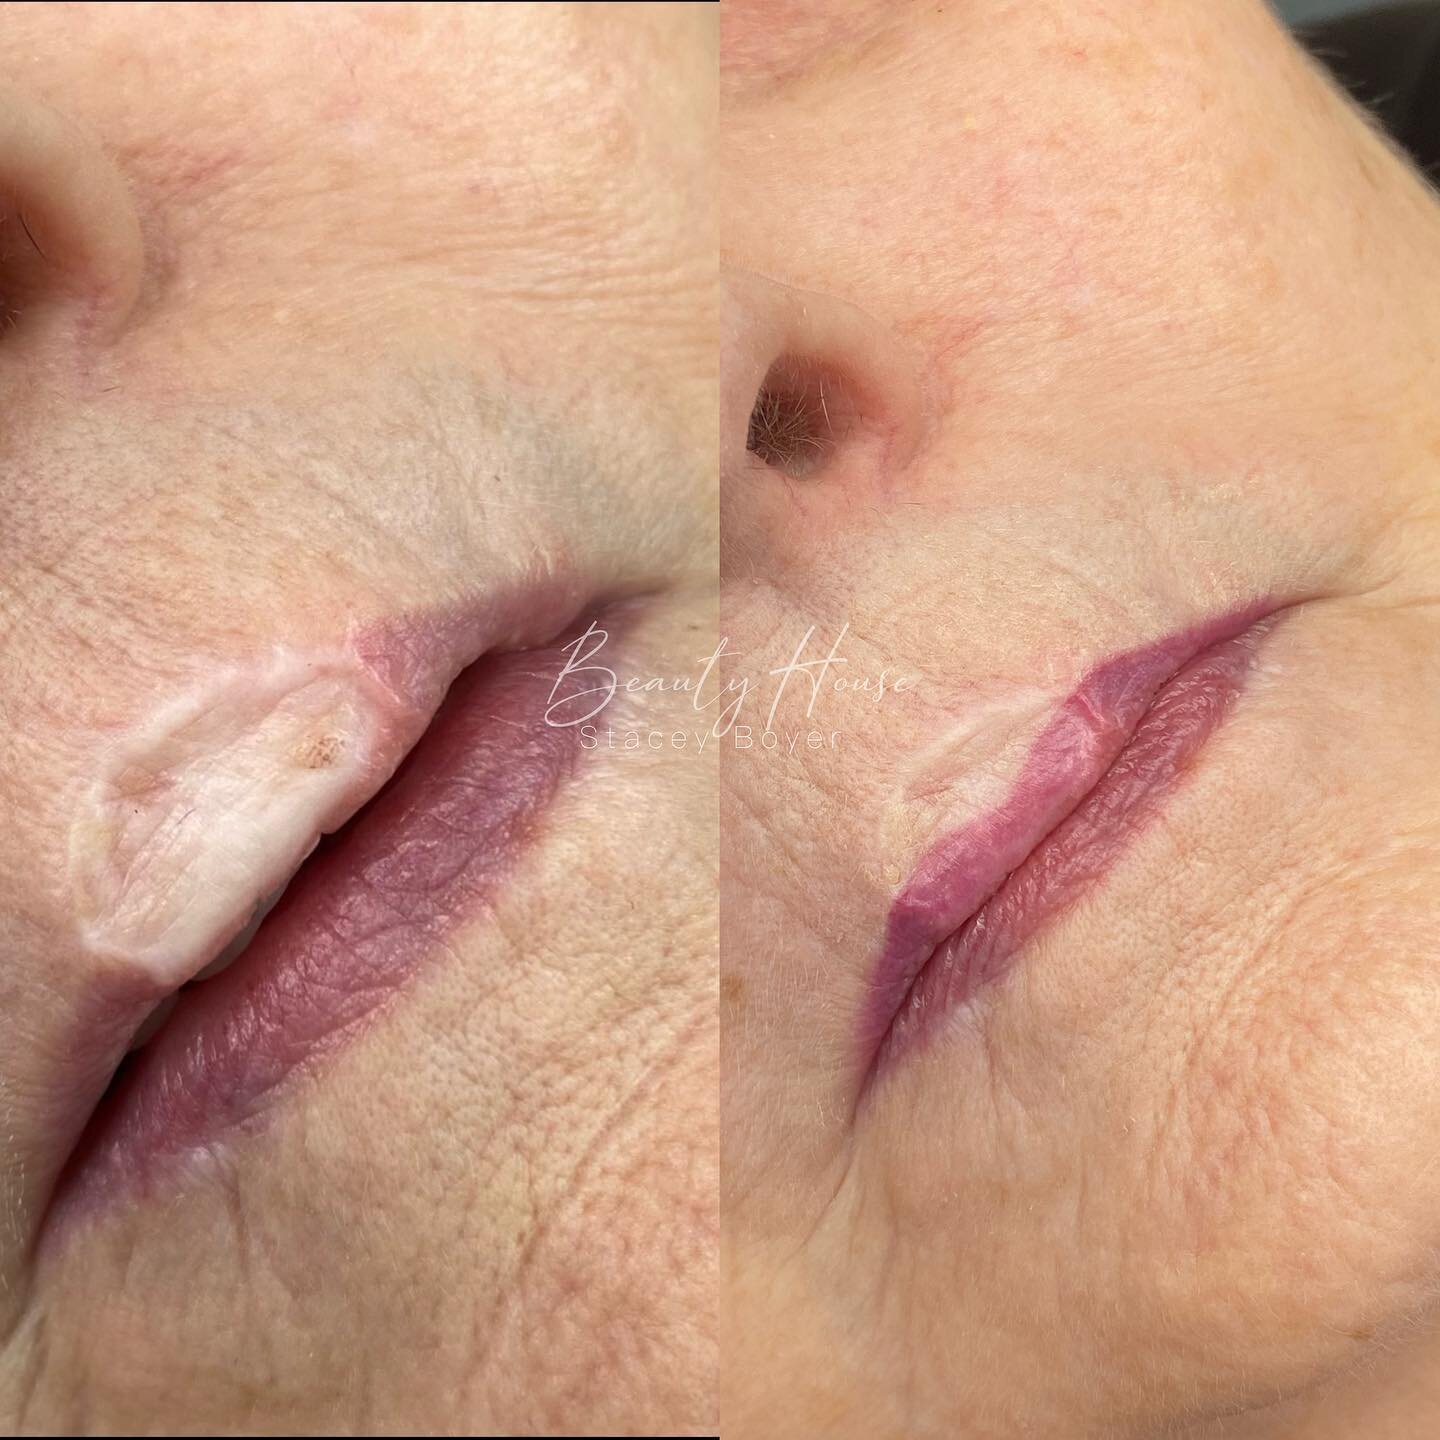 This lovely client had a skin cancer removed on her upper lip that required a skin graft and as you can see took her vermilion border away.
This is healed after 4 sessions. This is why I love my job so much. So rewarding 💕
&bull;
&bull;
&bull;
&bull